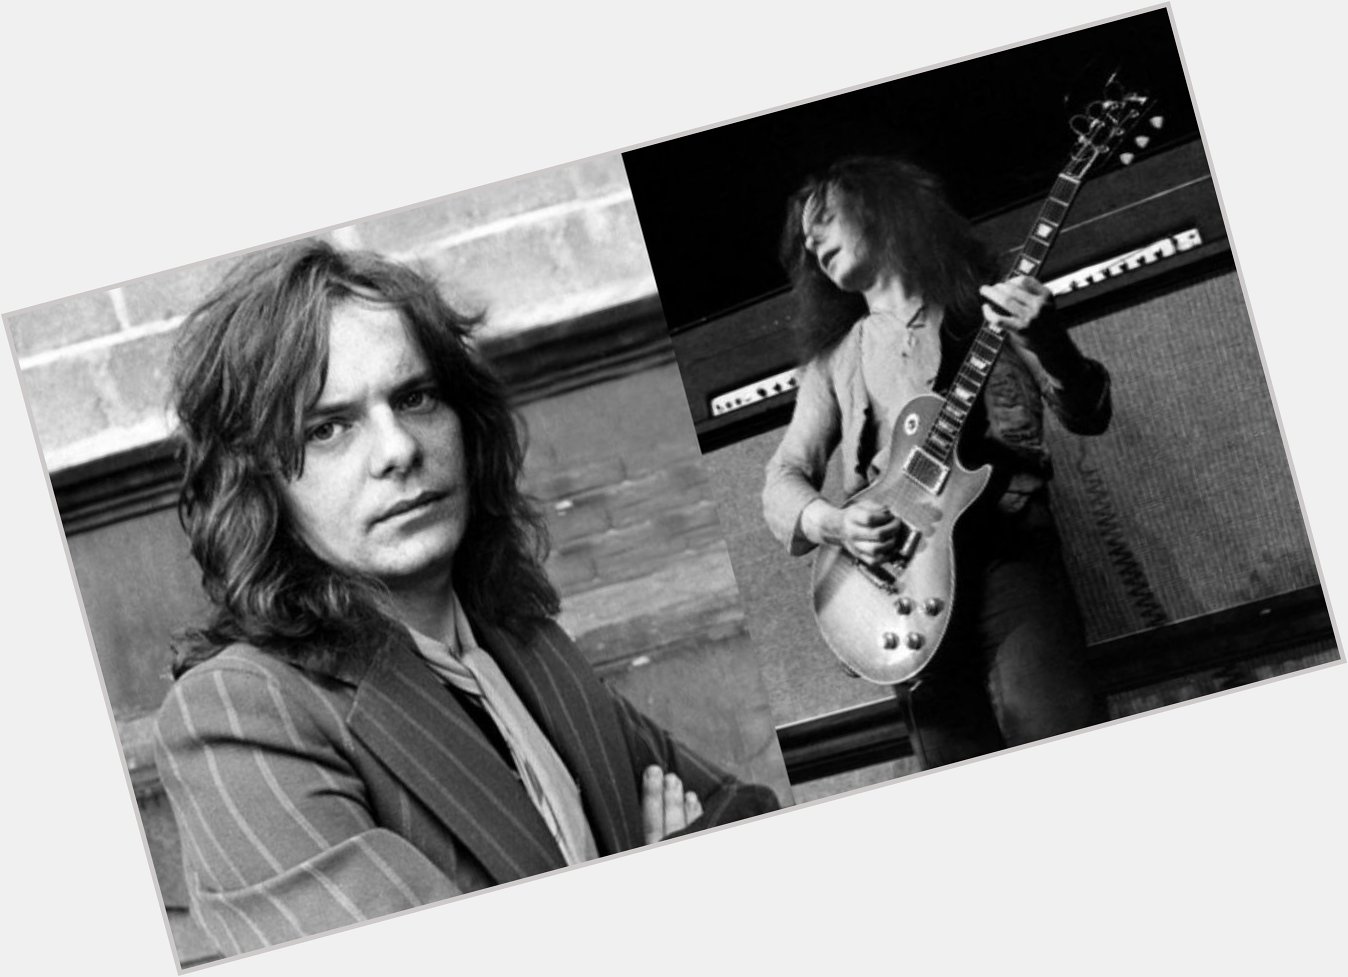 The incredible Free guitarist Paul Kossoff would celebrate his 71 birthday this September 15. Happy birthday, Paul! 